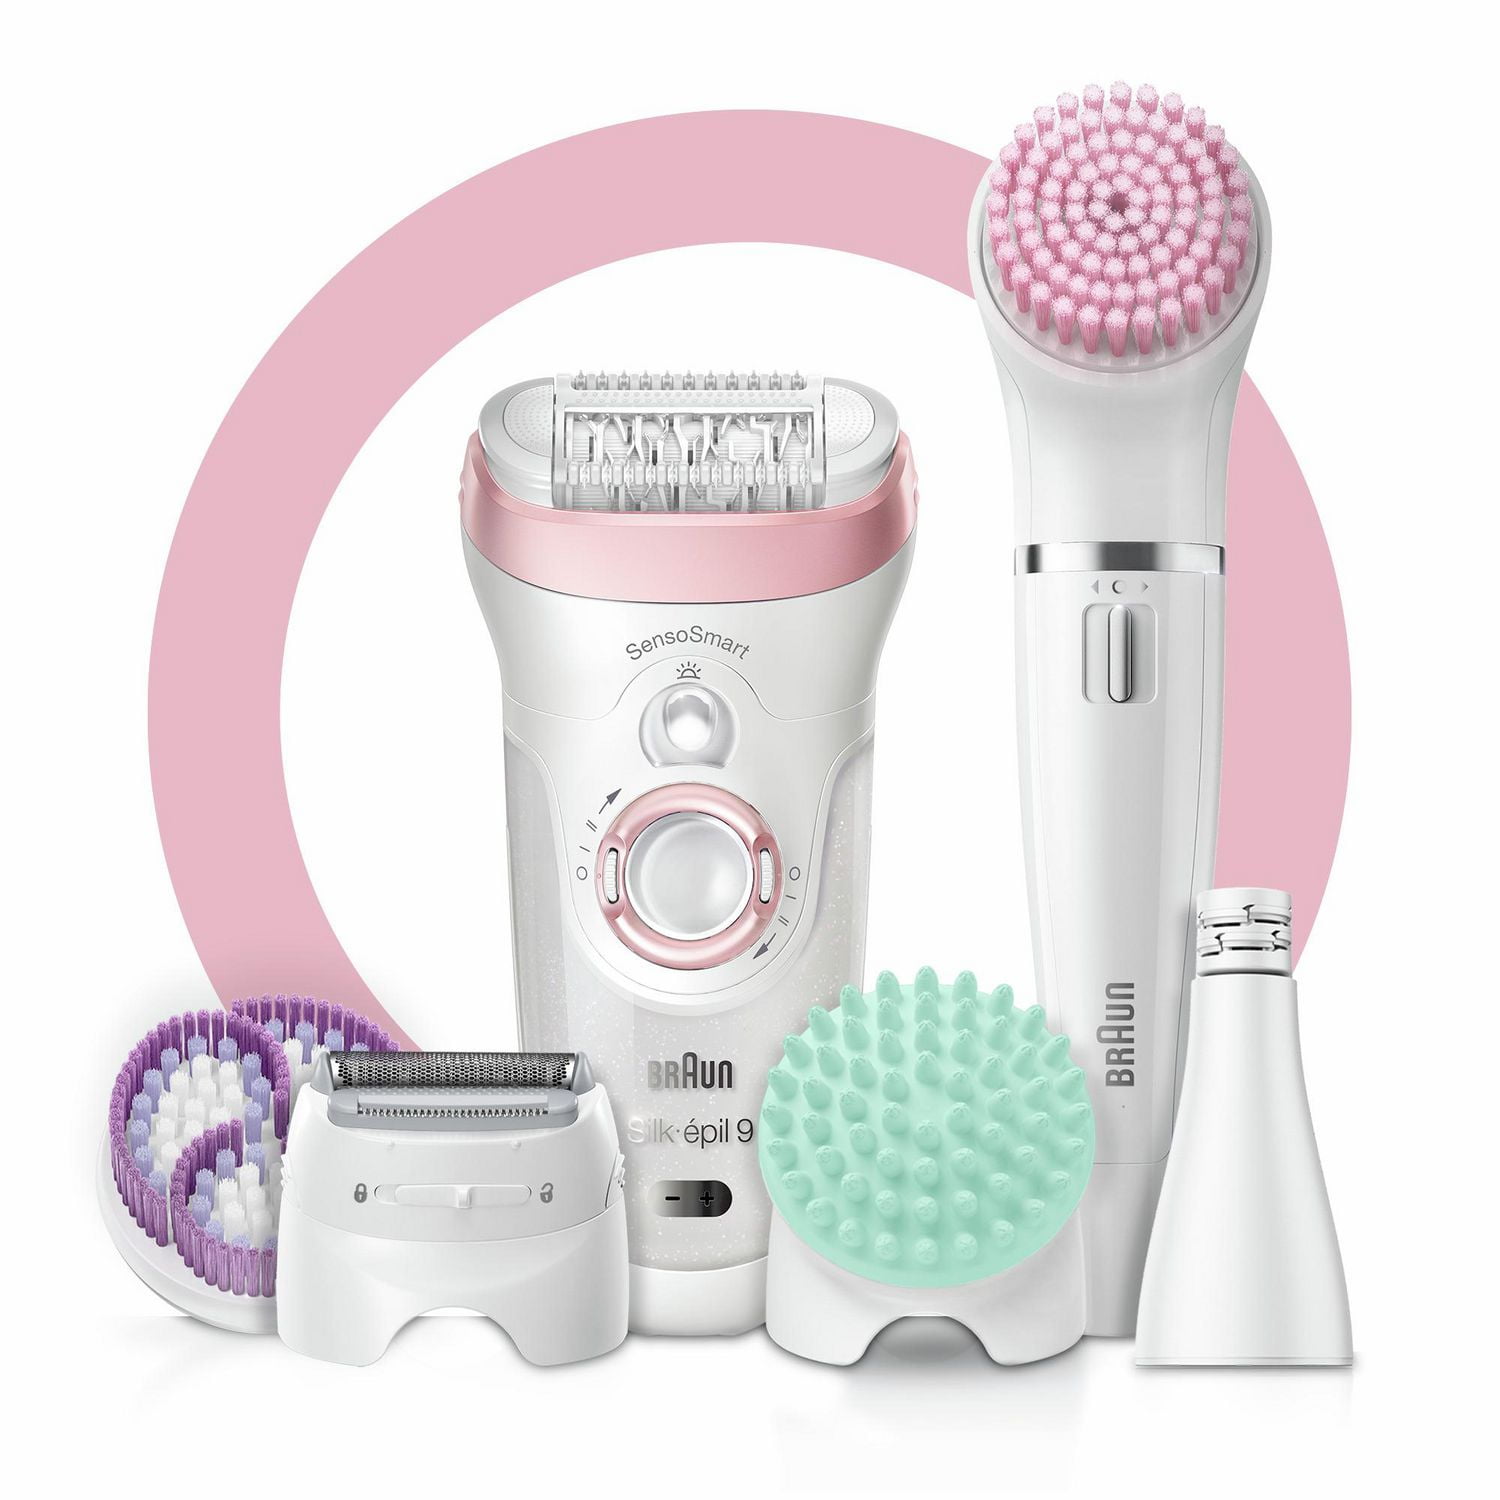 Braun Silk-épil Beauty Set 9 9-985 Deluxe 7-in-1 Cordless Wet & Dry Hair  Removal - Epilator, Shaver, Exfoliator, Cleansing Kit for Face & Body 